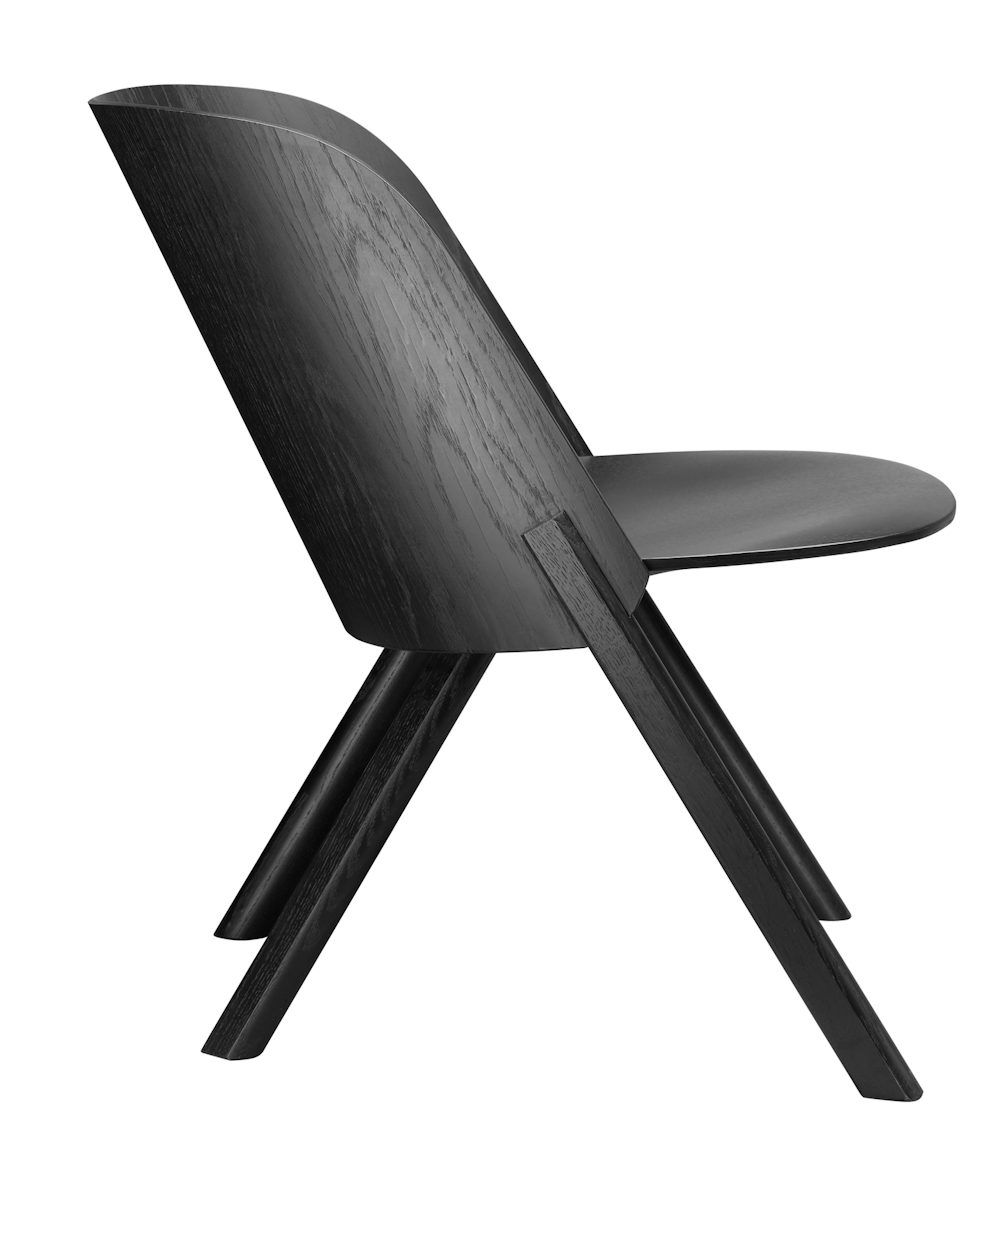 e15 profile of that lounge chair in jet black